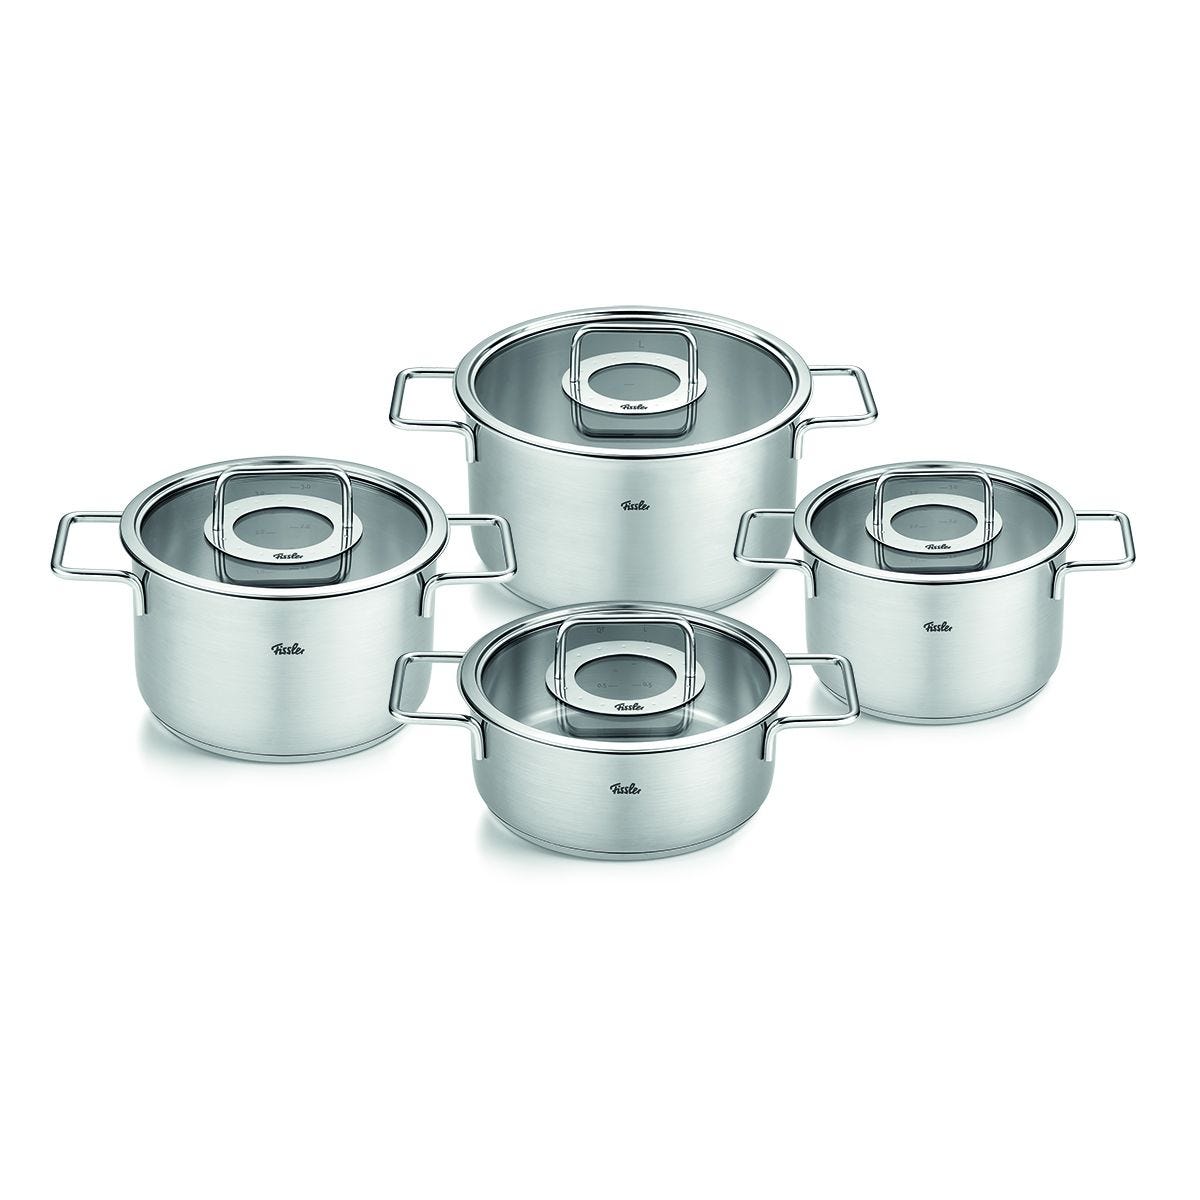 Pure Collection Stainless Steel 9-piece set with glass lids